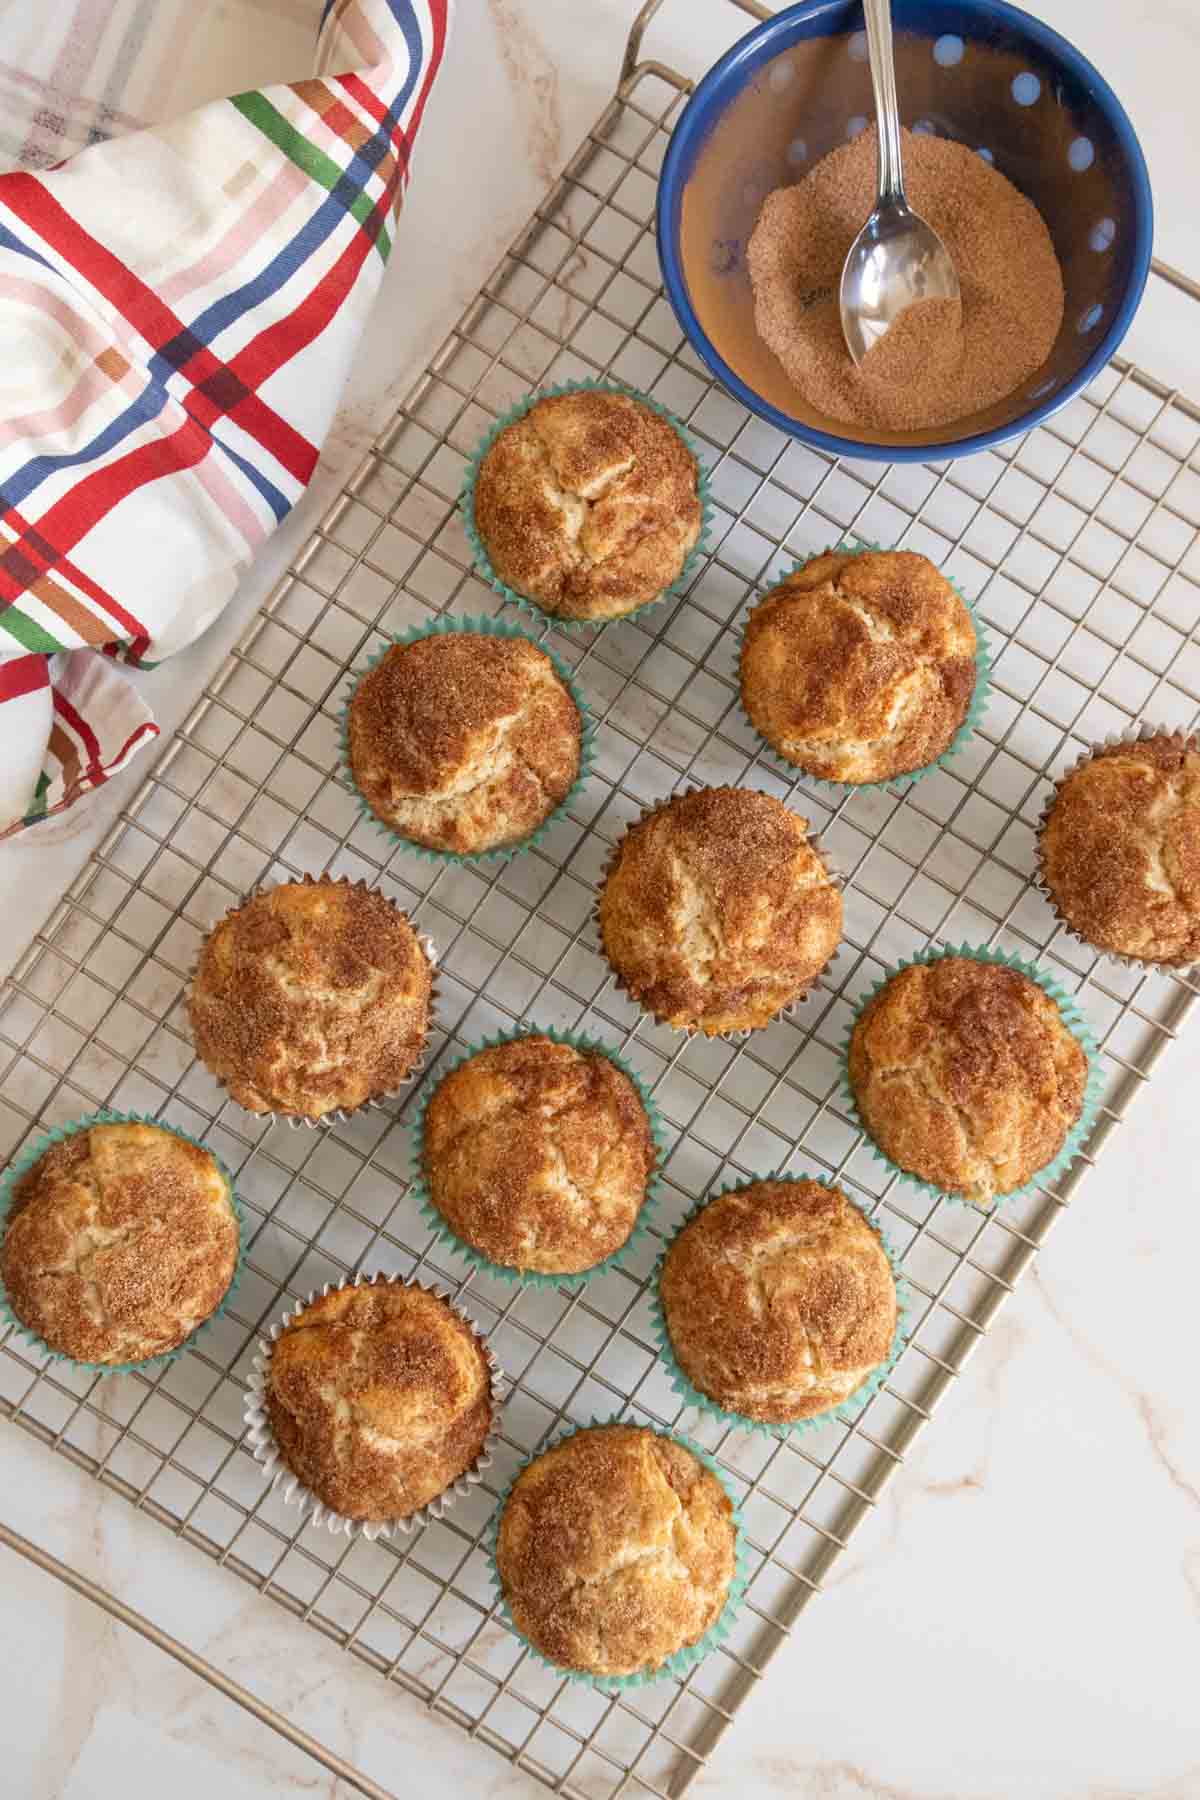 Cinnamon muffins on a cooling rack.